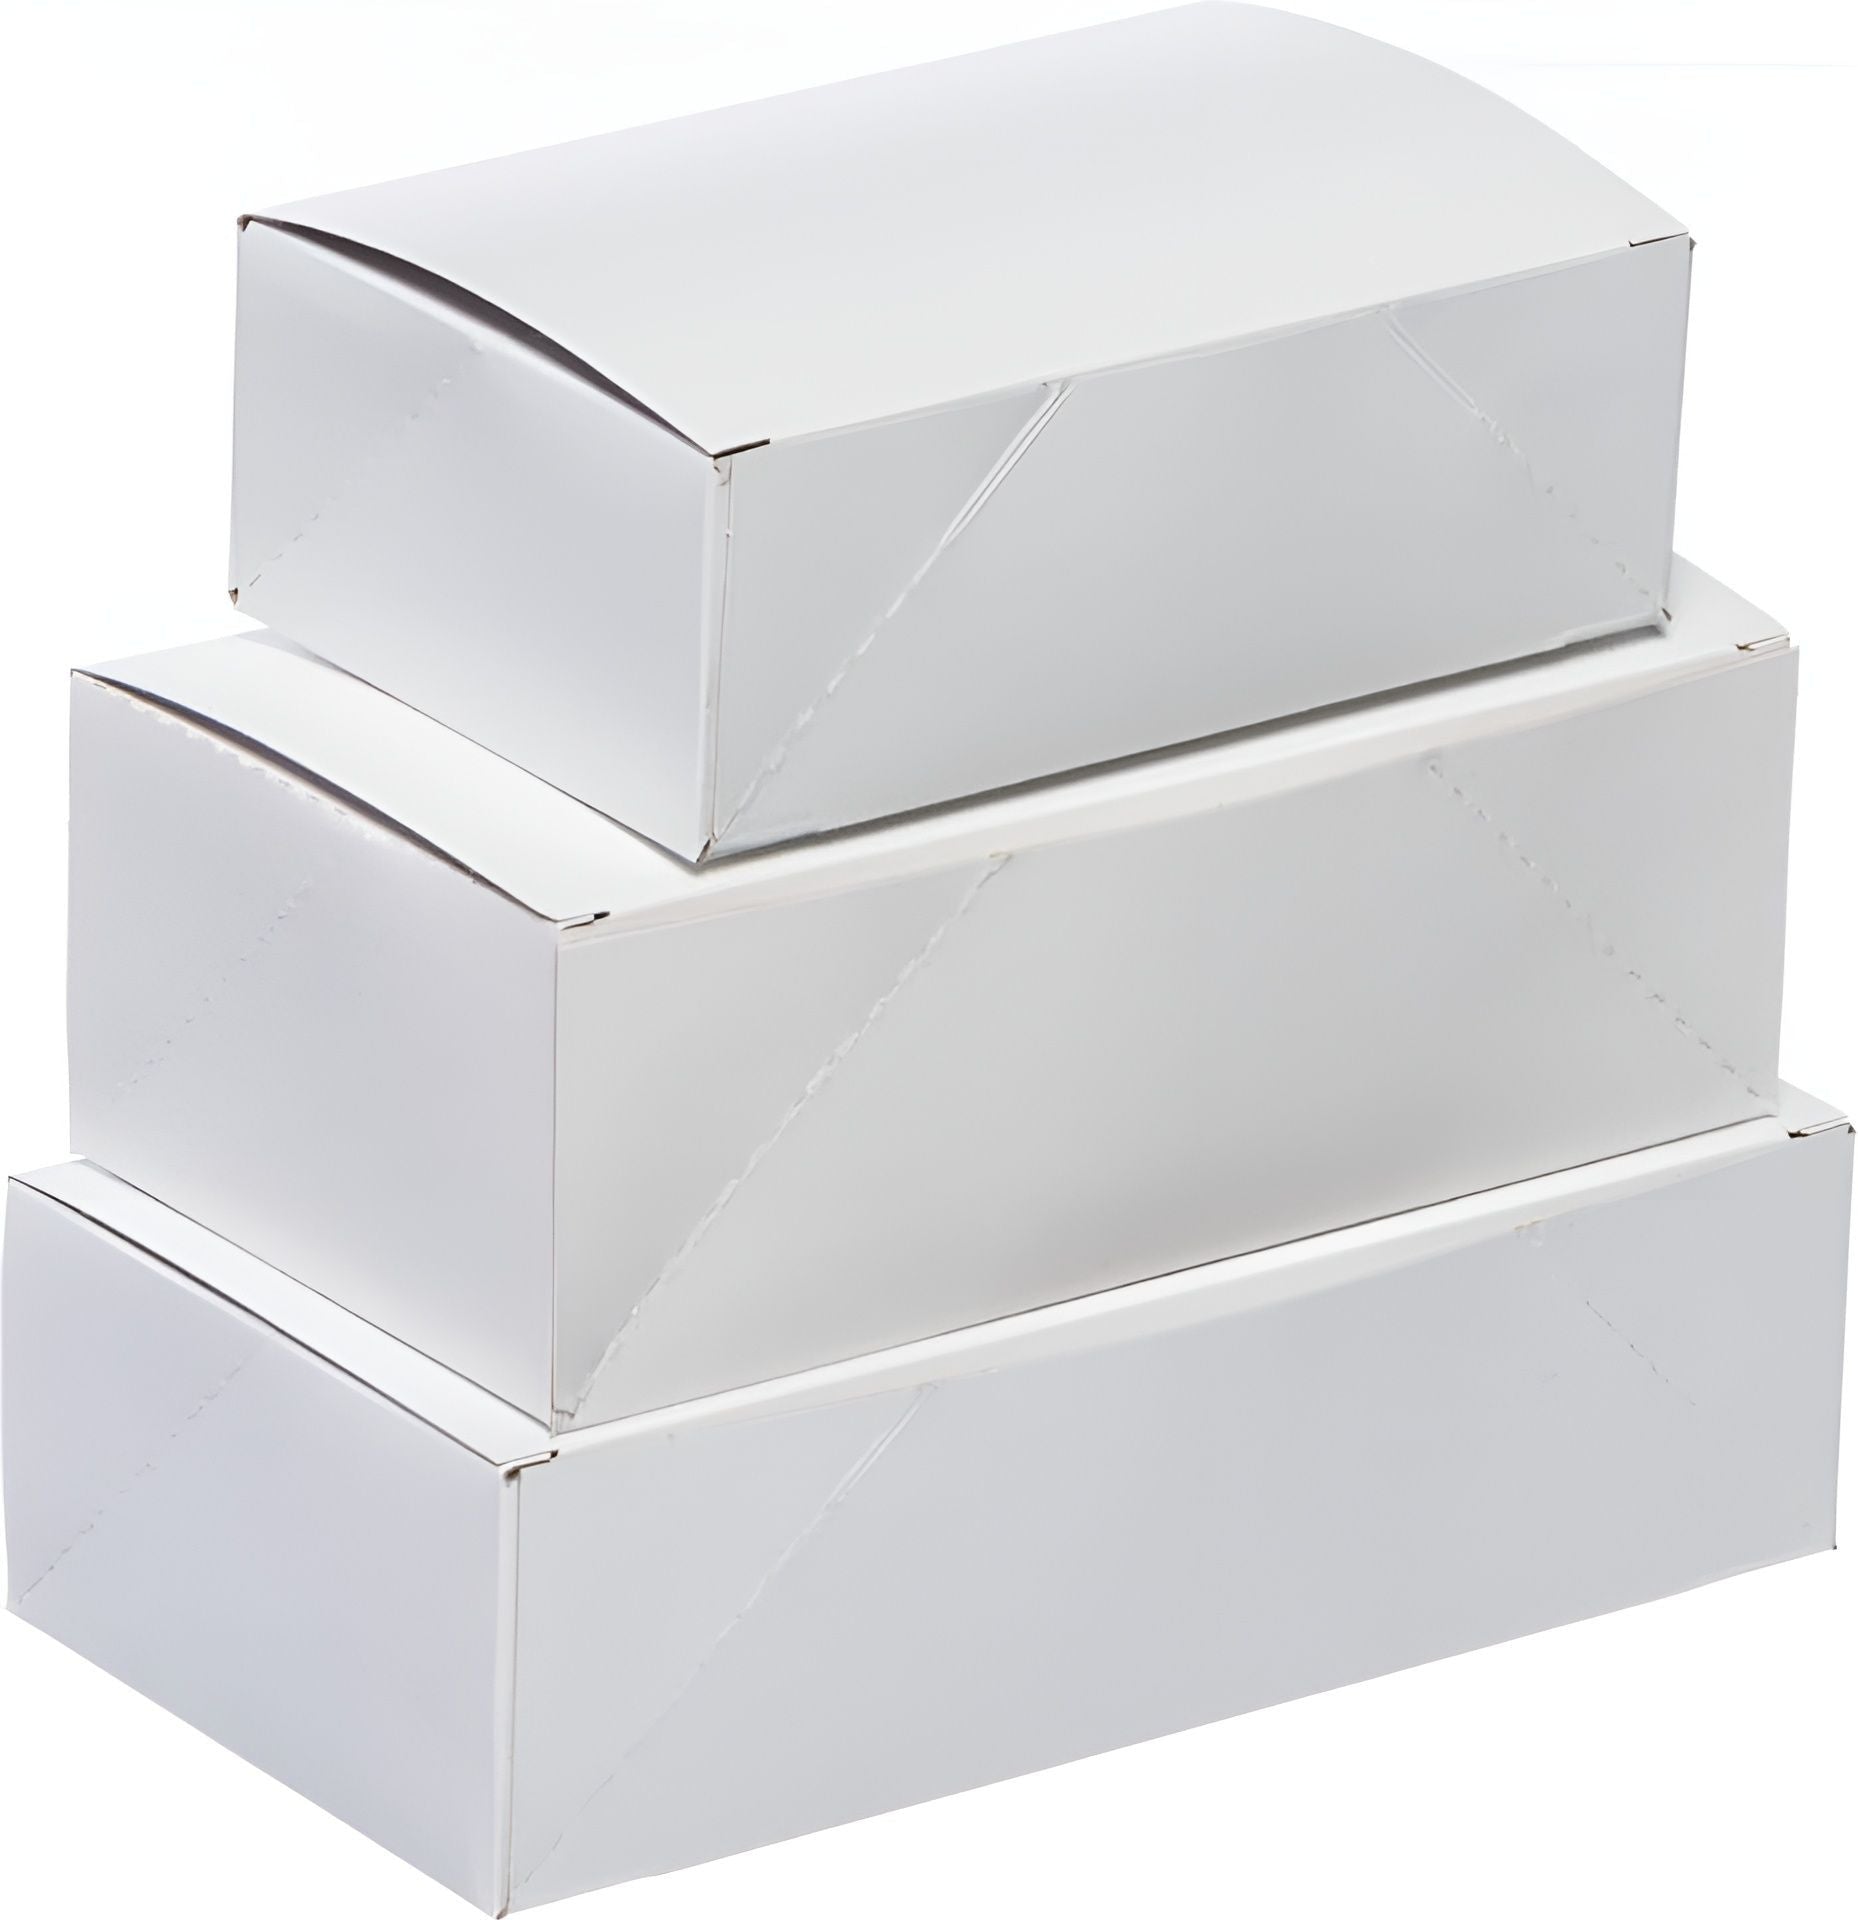 EB Box - 6.5" x 4.25" x 2.25" White Plain Snack Carton Greaseproof, Glued Food Containers, 400/bn - 105500